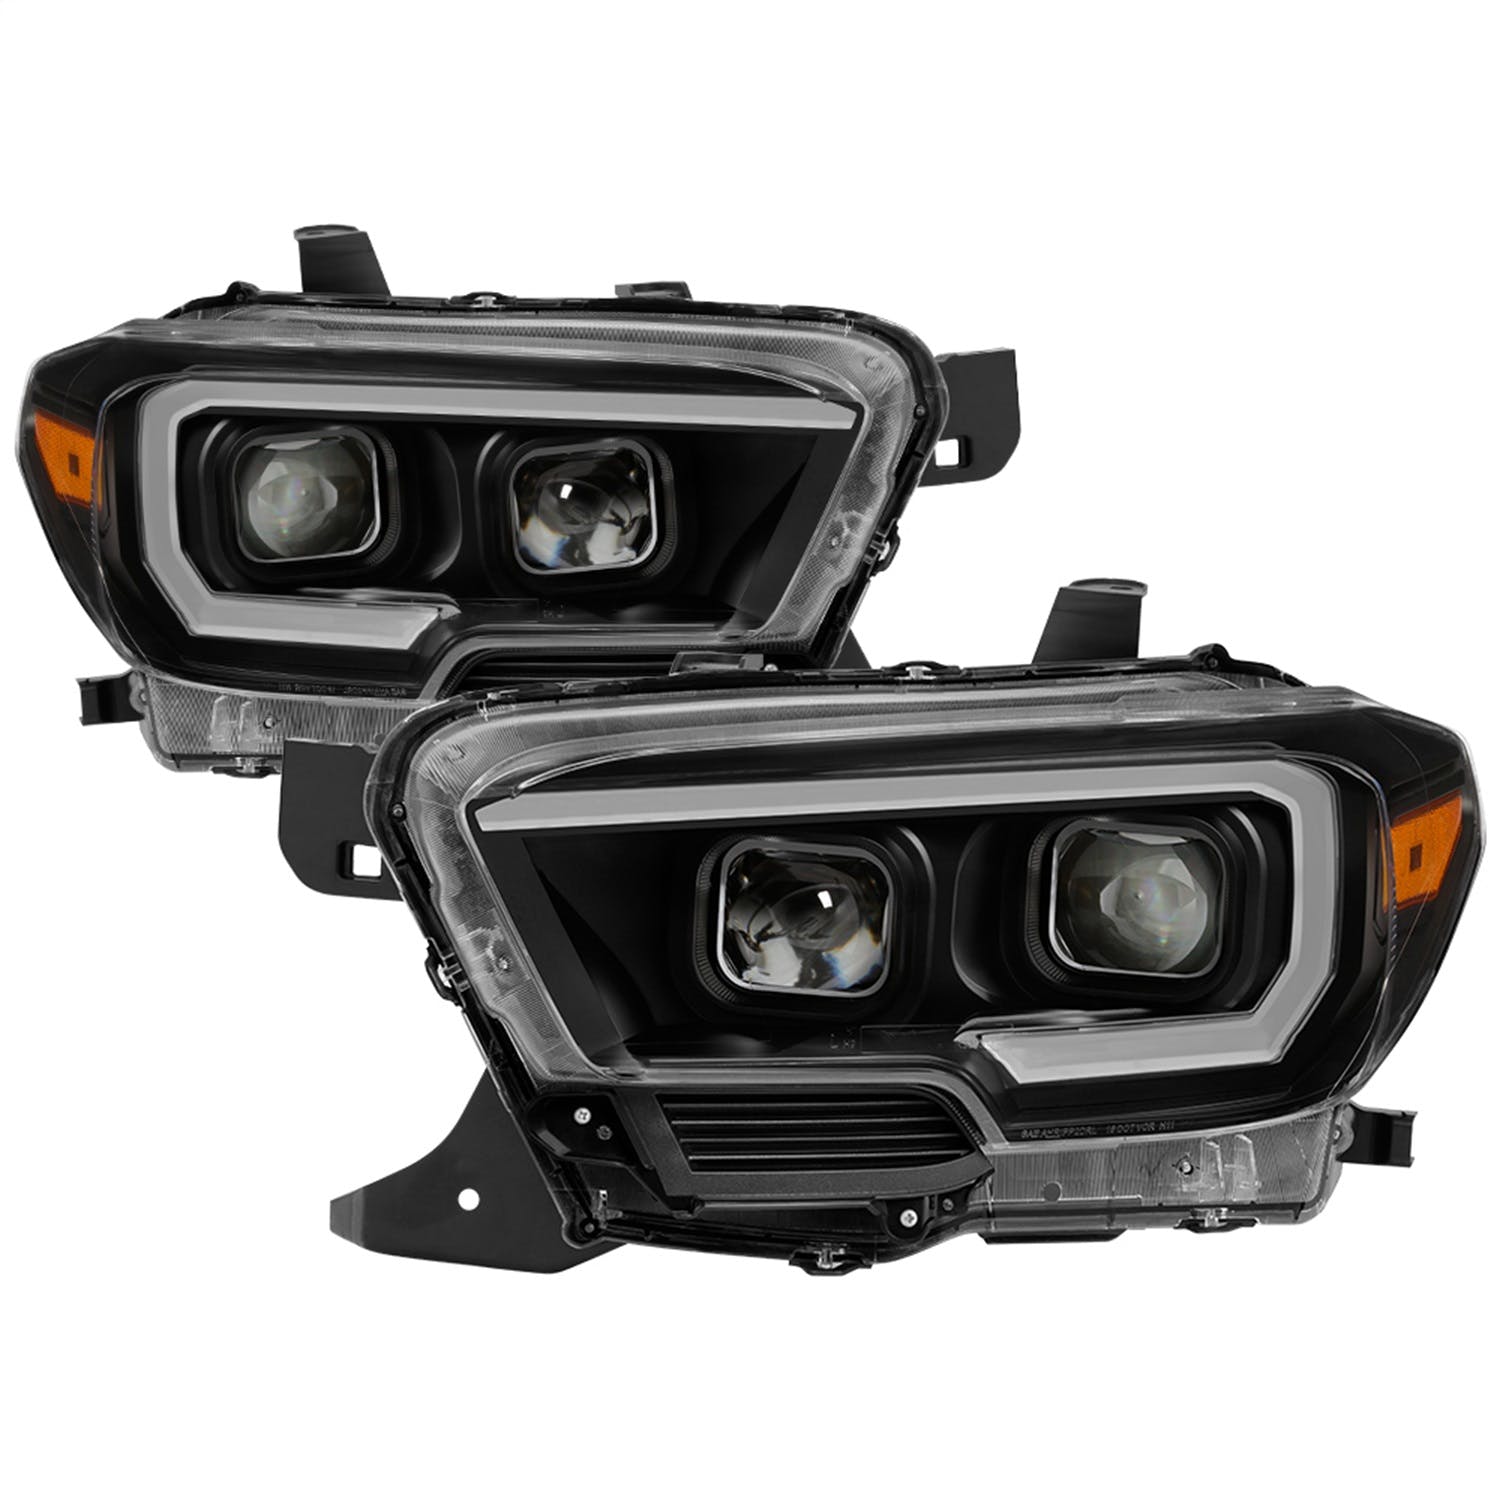 XTUNE POWER 9039256 Toyota Tacoma 2016 2019 TRD Models only ( Does Not Fit SR and SR5 Models ) DRL Light Bar Projector Headlights with Sequential Turn Signal Low Beam H11(Included) ; High Beam H9(Included) ; Signal LED(Included) Black